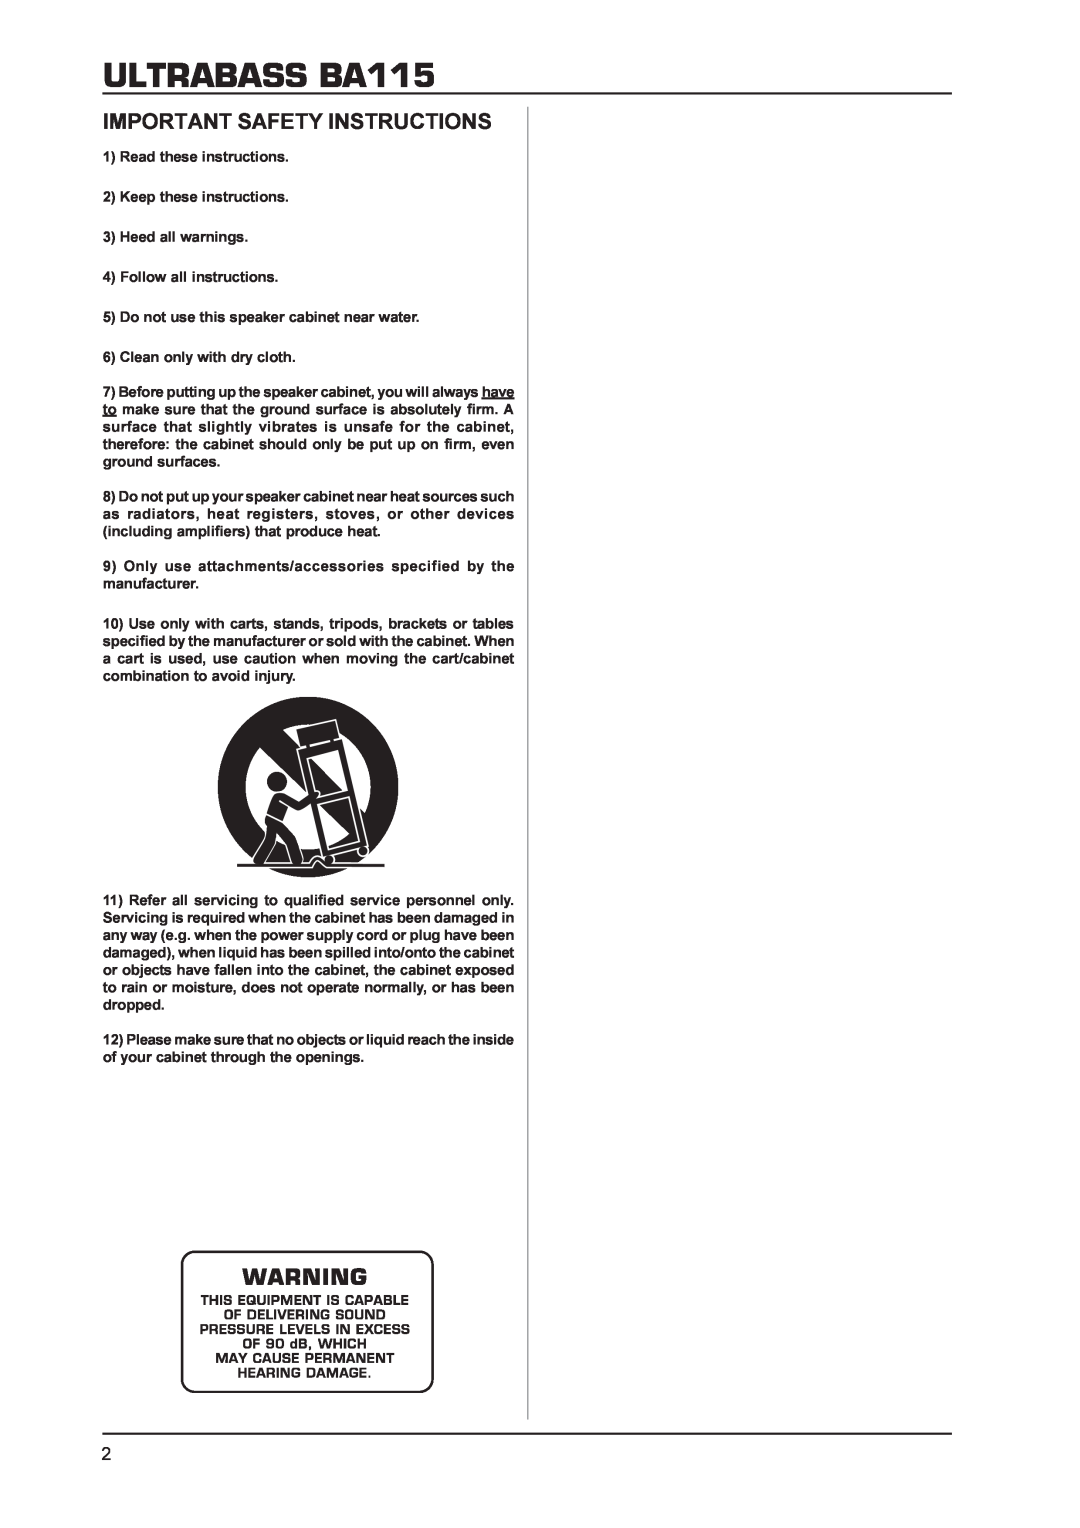 Behringer manual ULTRABASS BA115, Important Safety Instructions 